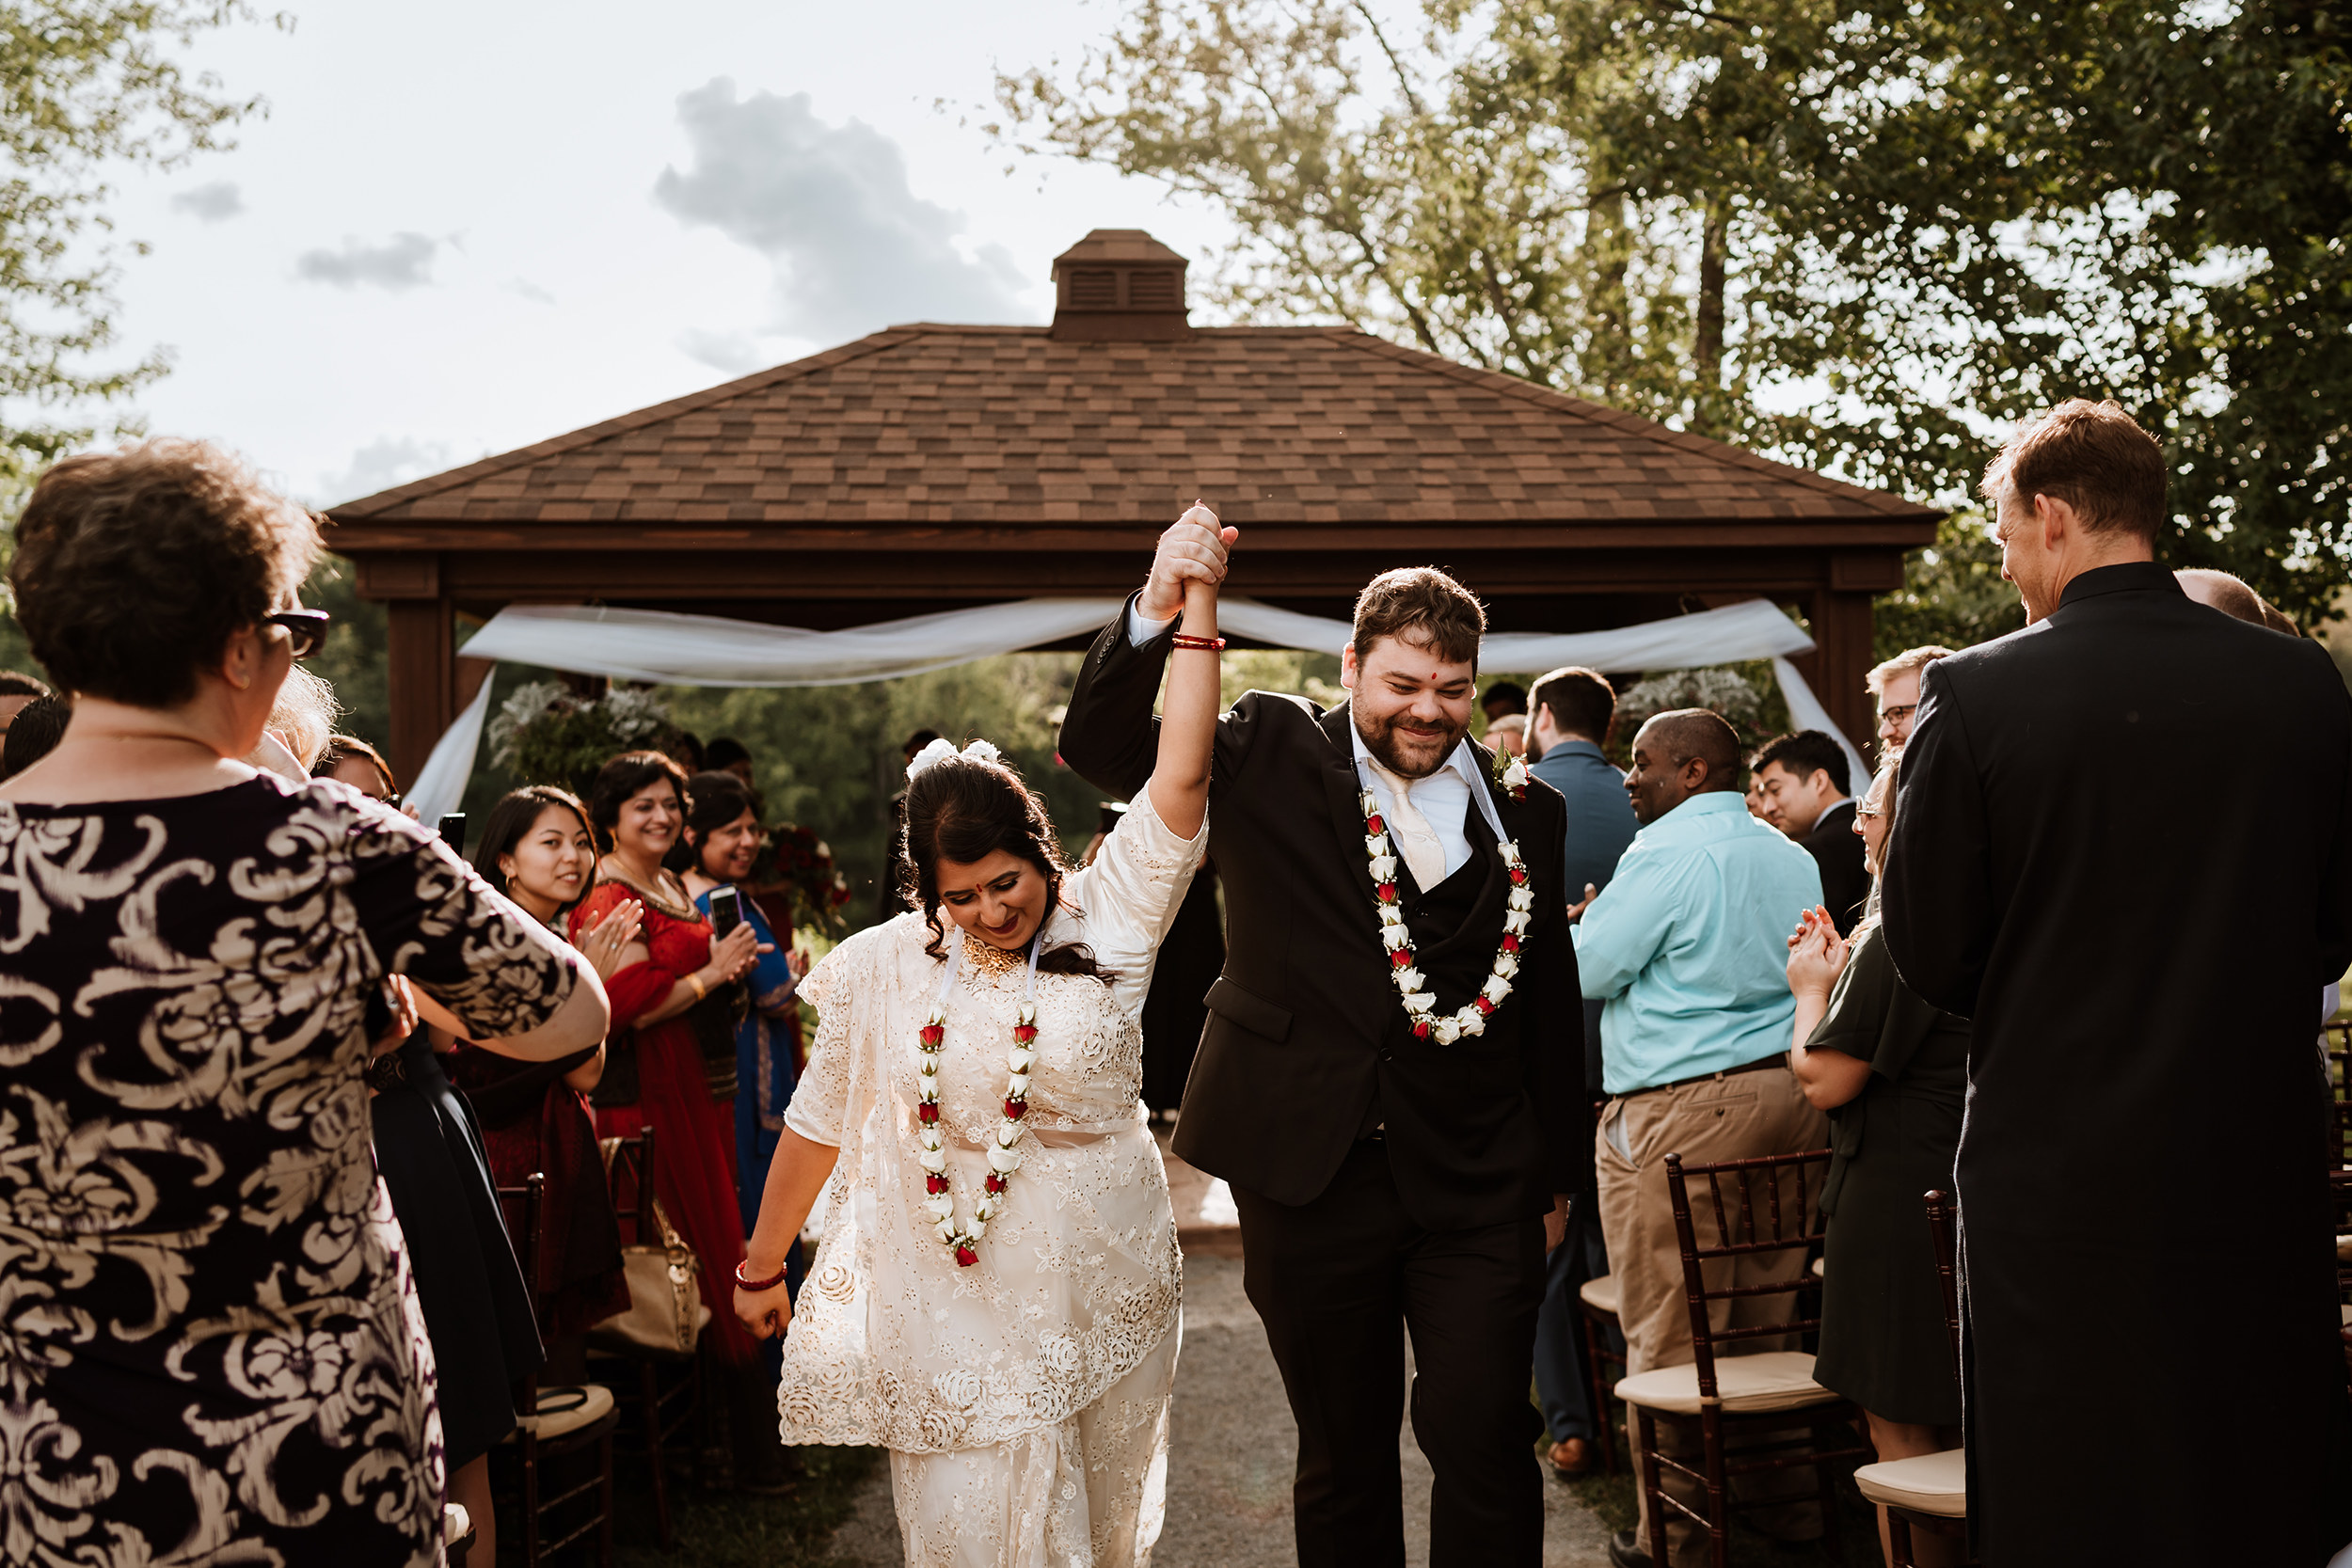 A wedding couple hold hands and raise them in the air as they exit their wedding ceremony.